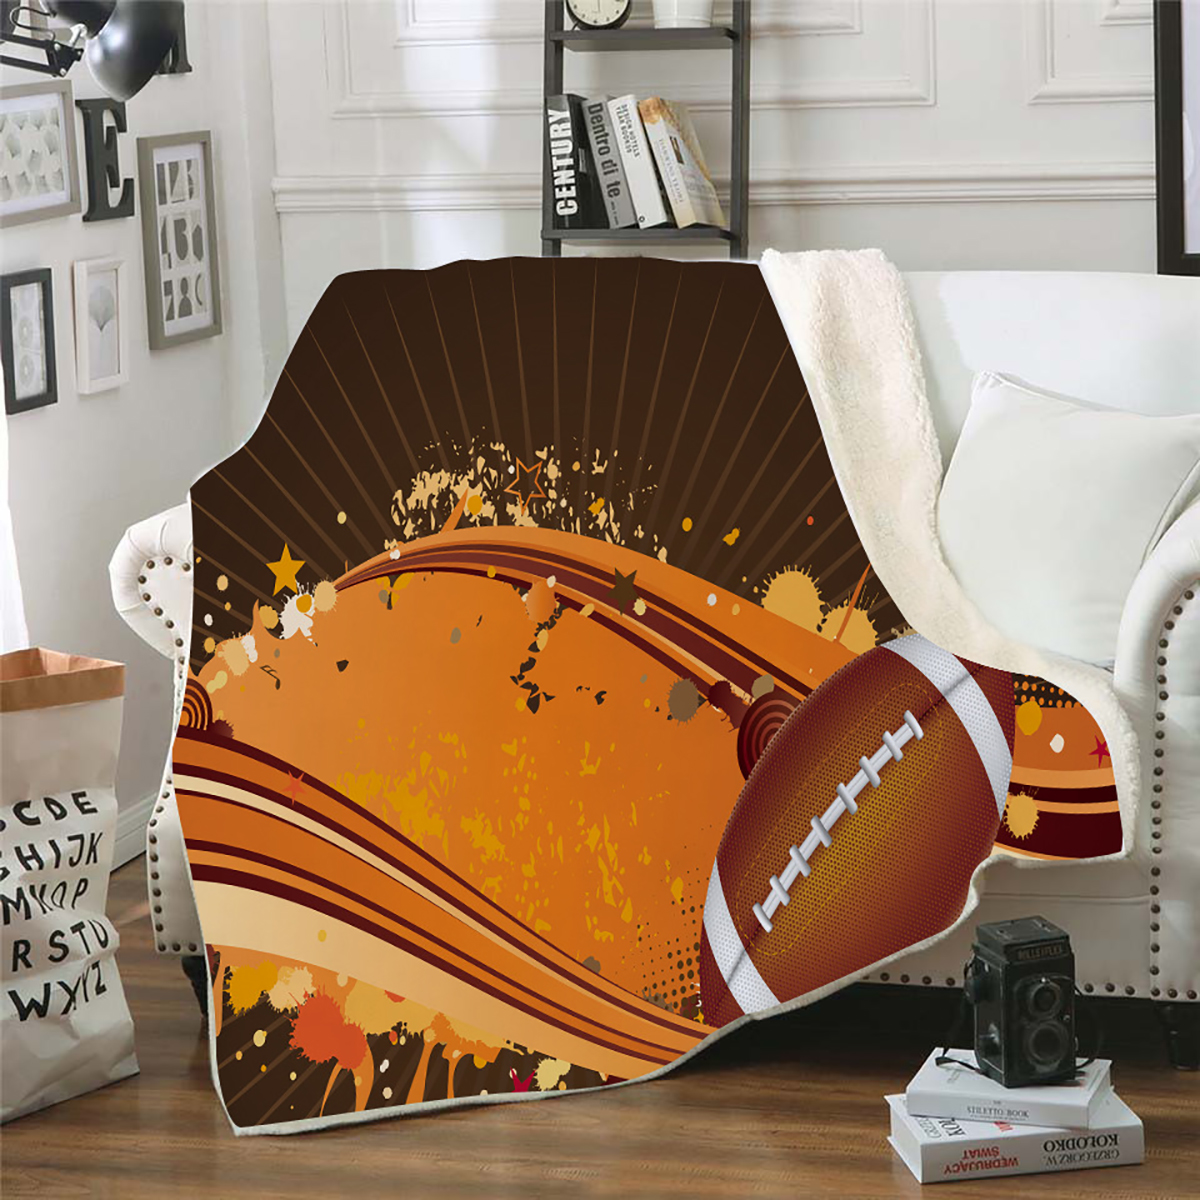 Double-Thicken-Blanket-3D-Digital-Printing-Blanket-Fugby-Series-Sofa-Cover-Rugby-Cartoon-Bedding-1924765-3